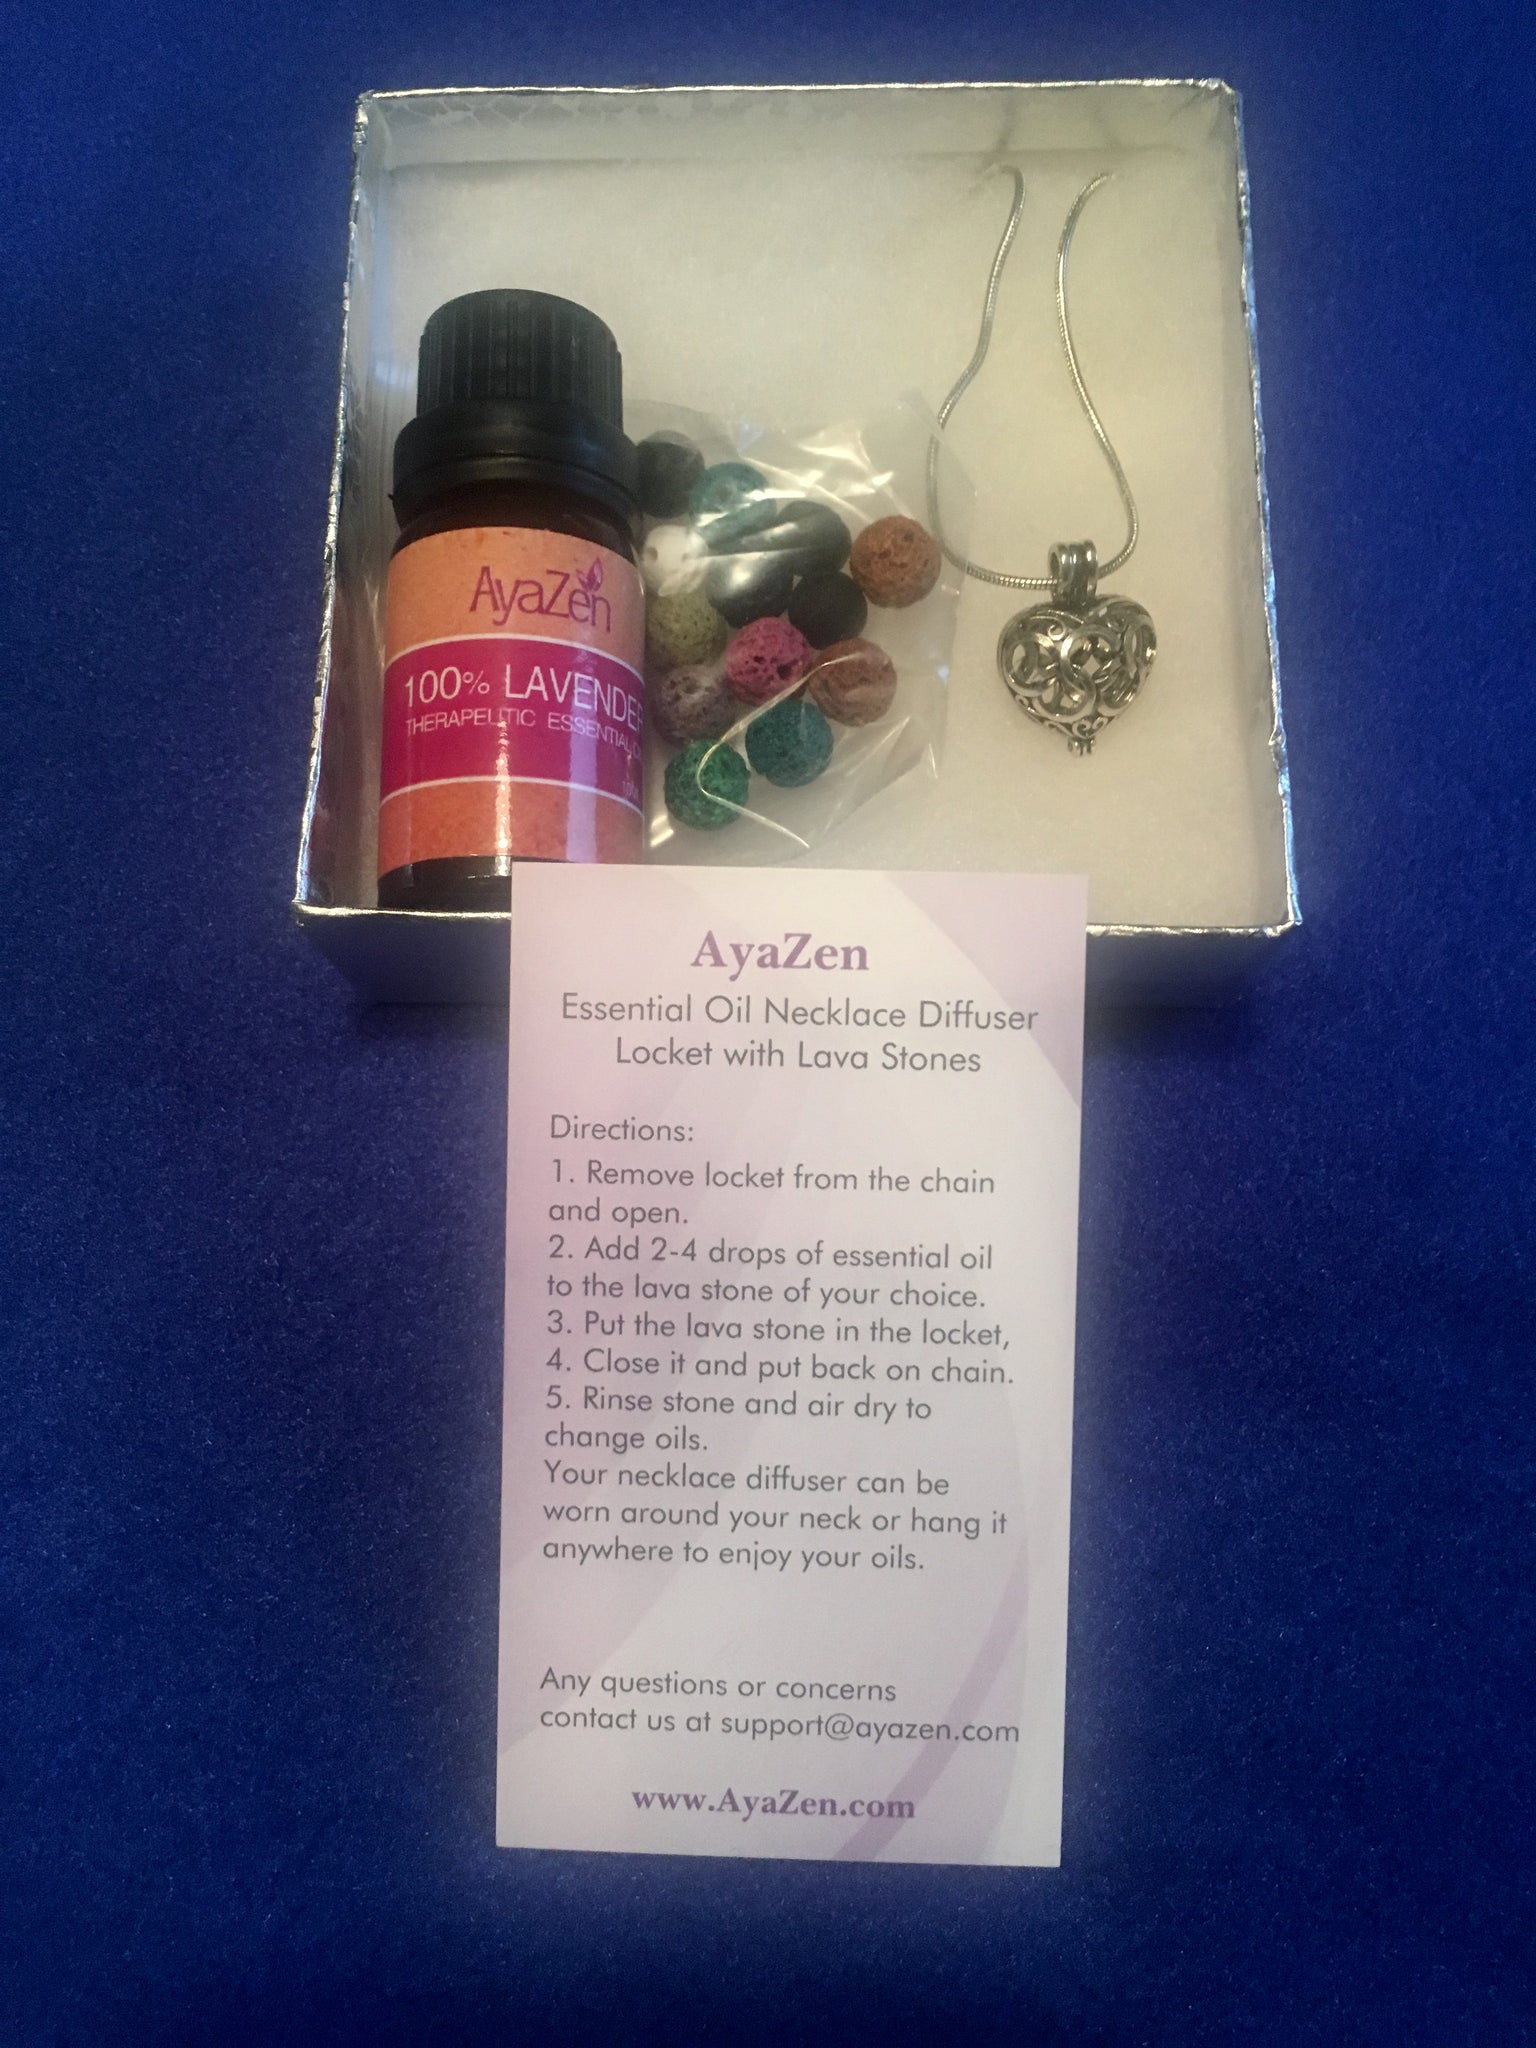 Lavender Essential Oil Plus AyaZen Heart Aromatherapy Necklace Diffuser With Lava Stones Aromatherapy Gift Set - AyaZen